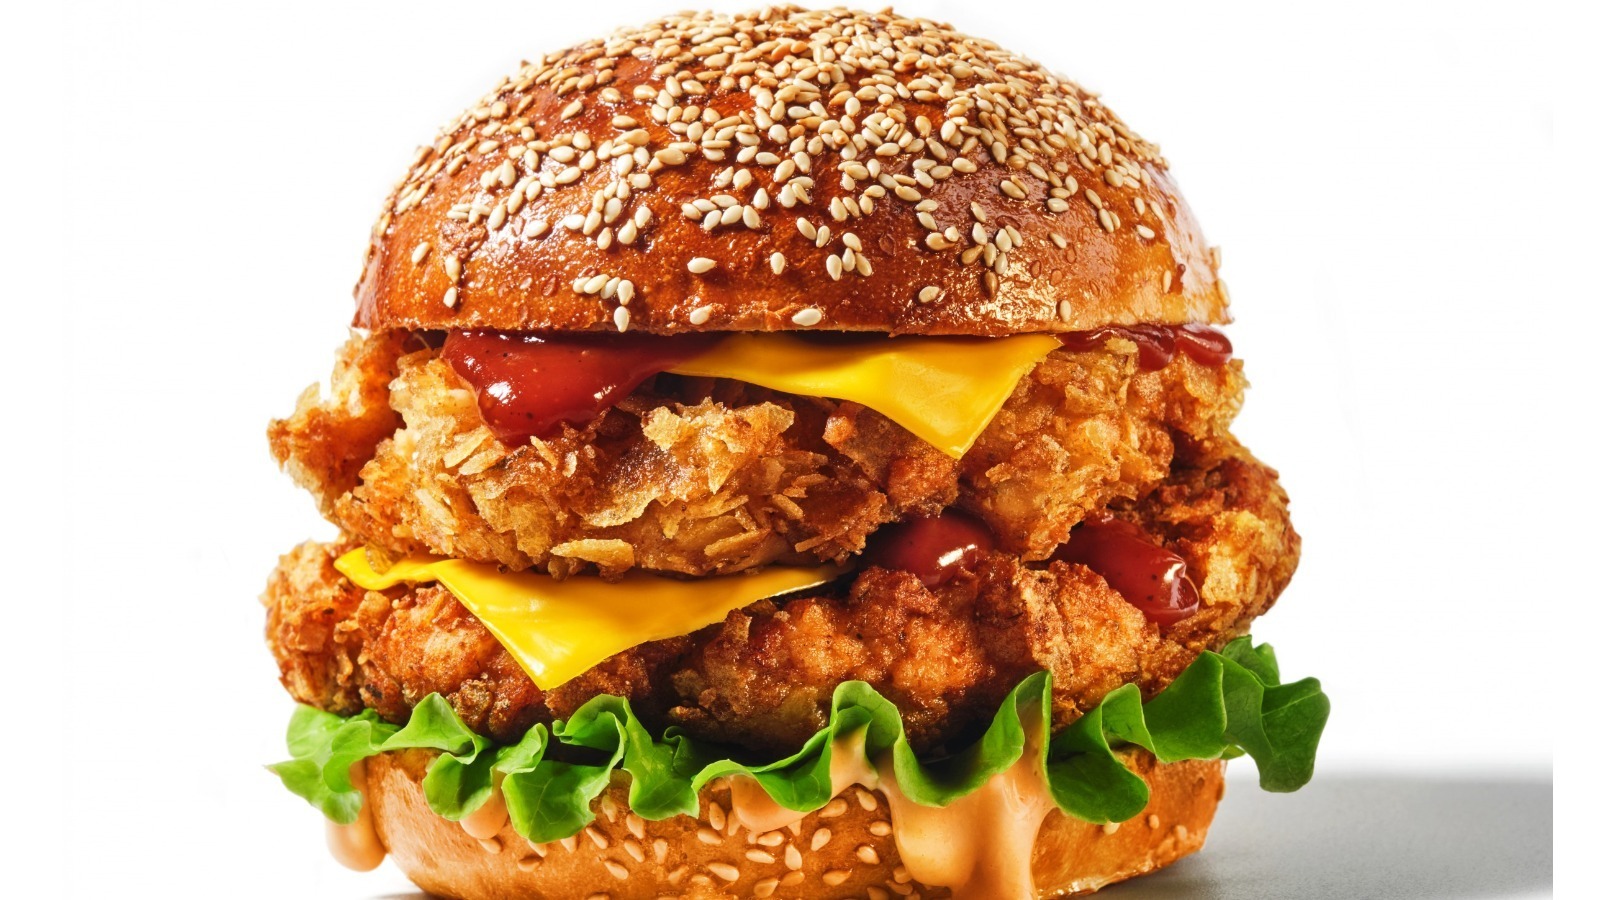 This Is Still The Best Fast Food Chicken Sandwich, According To Fans